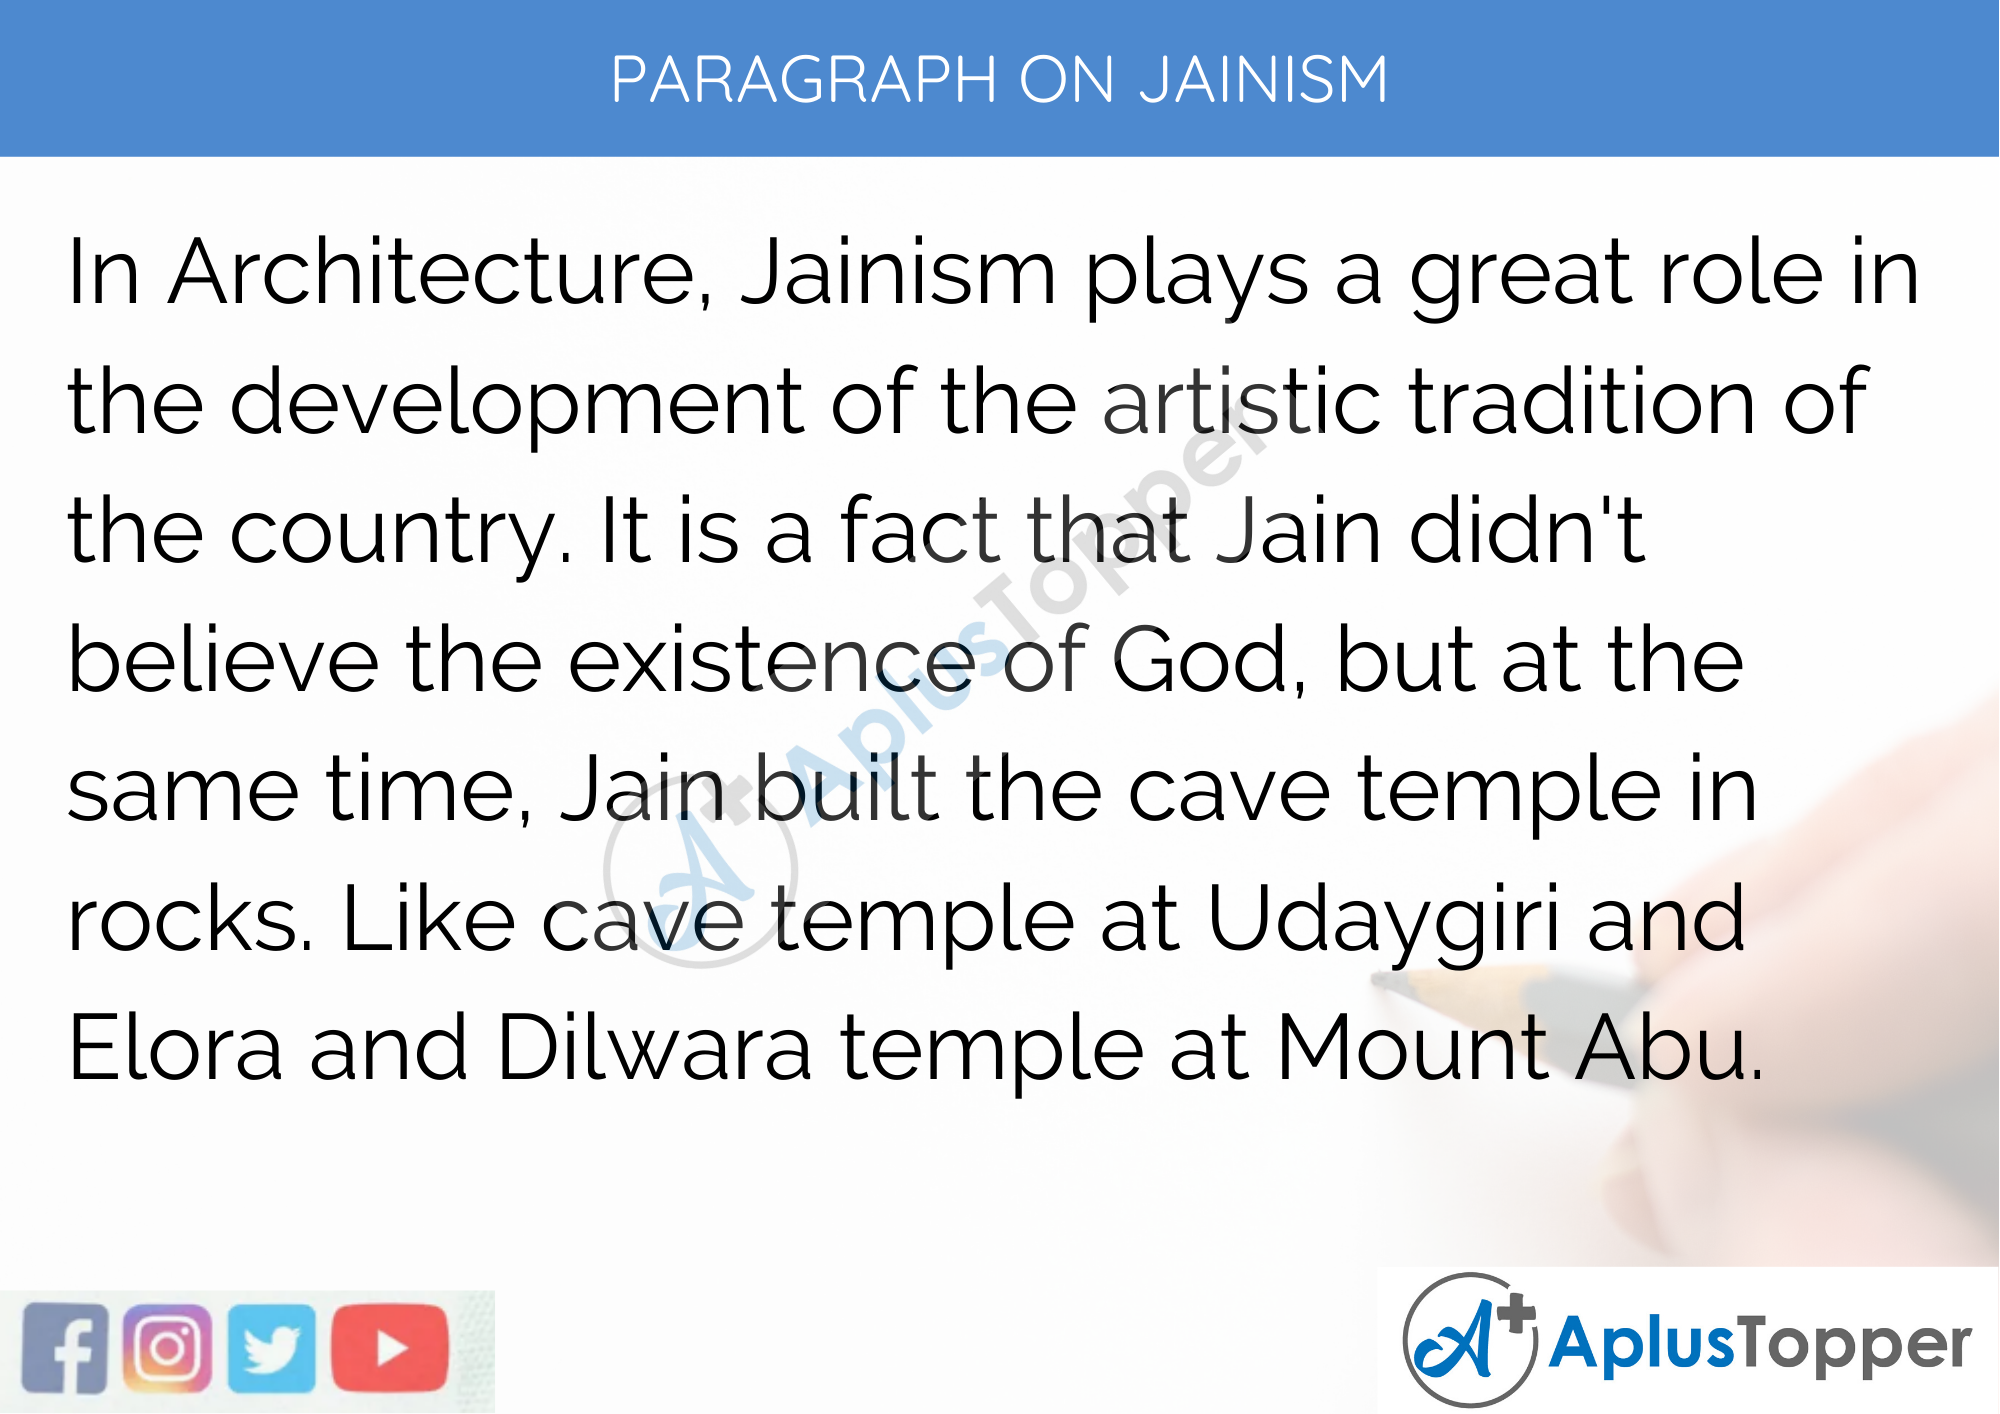 Paragraph on Jainism - 250 to 300 Words for Classes 9,10,11,12 and Competitive Exam Students